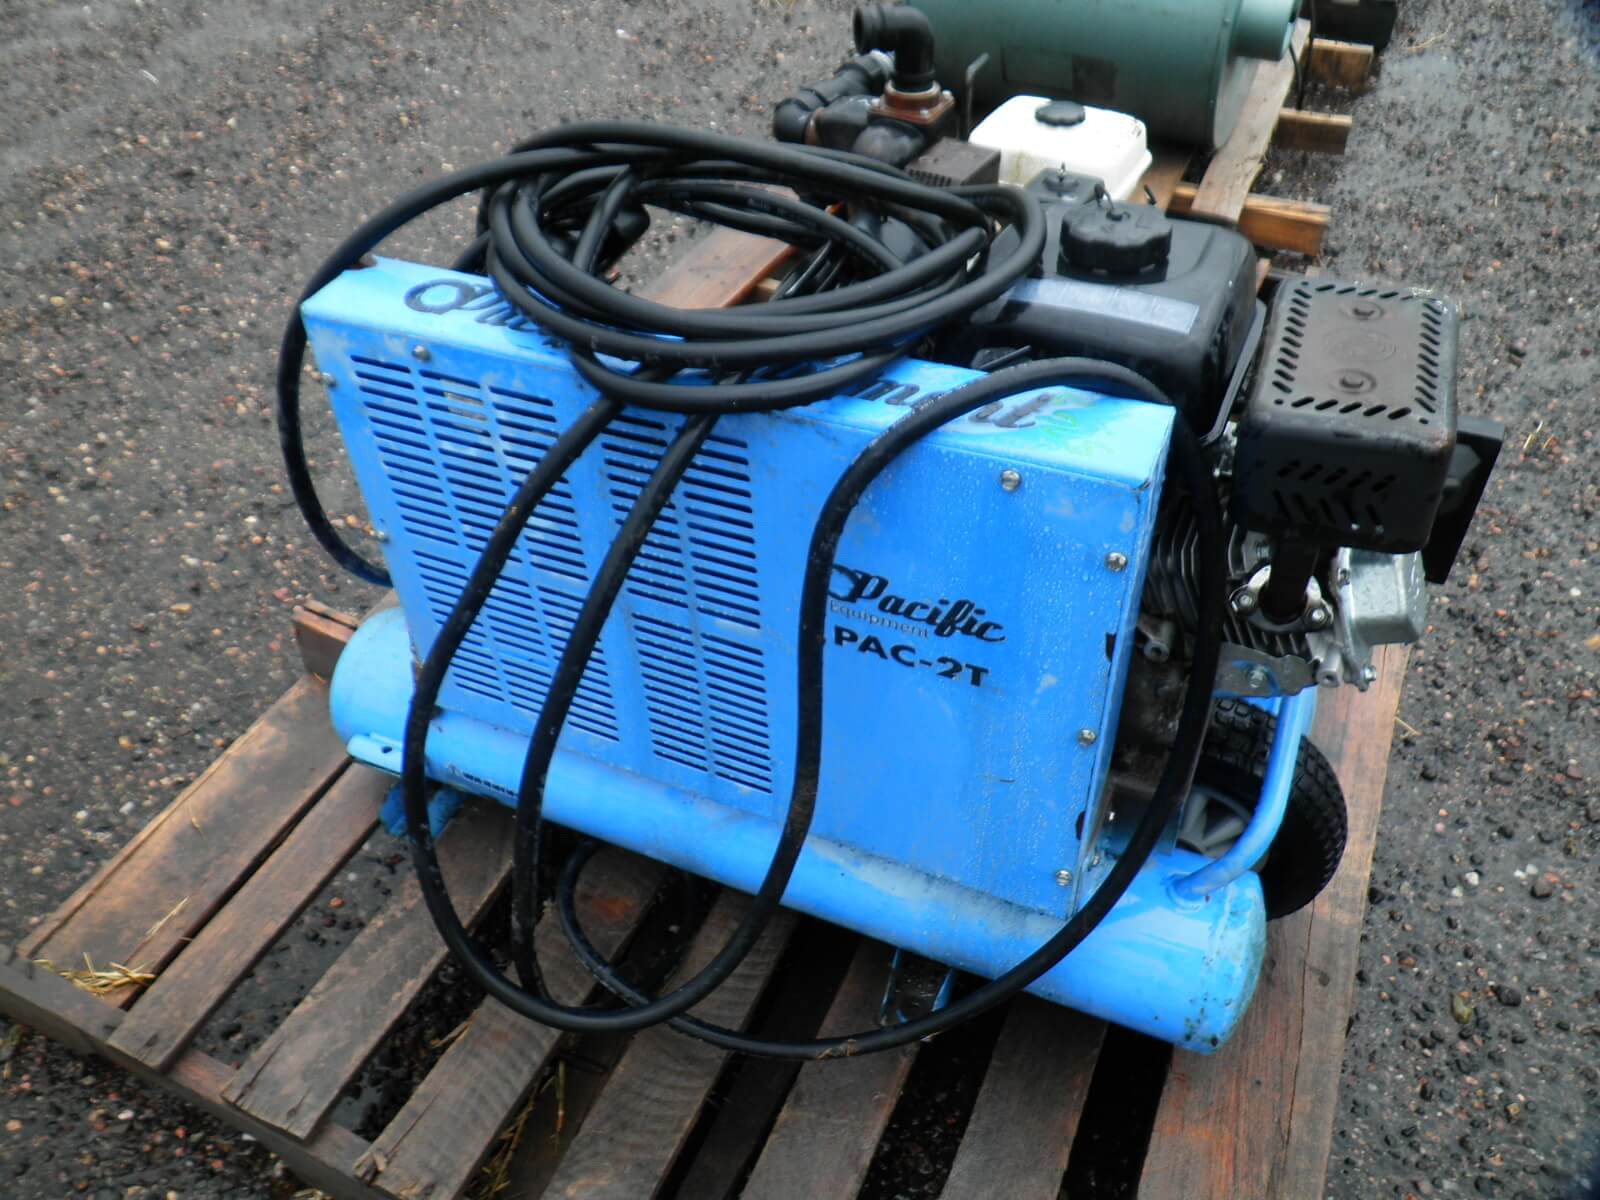 Pacific Pac-2T air compressor main image